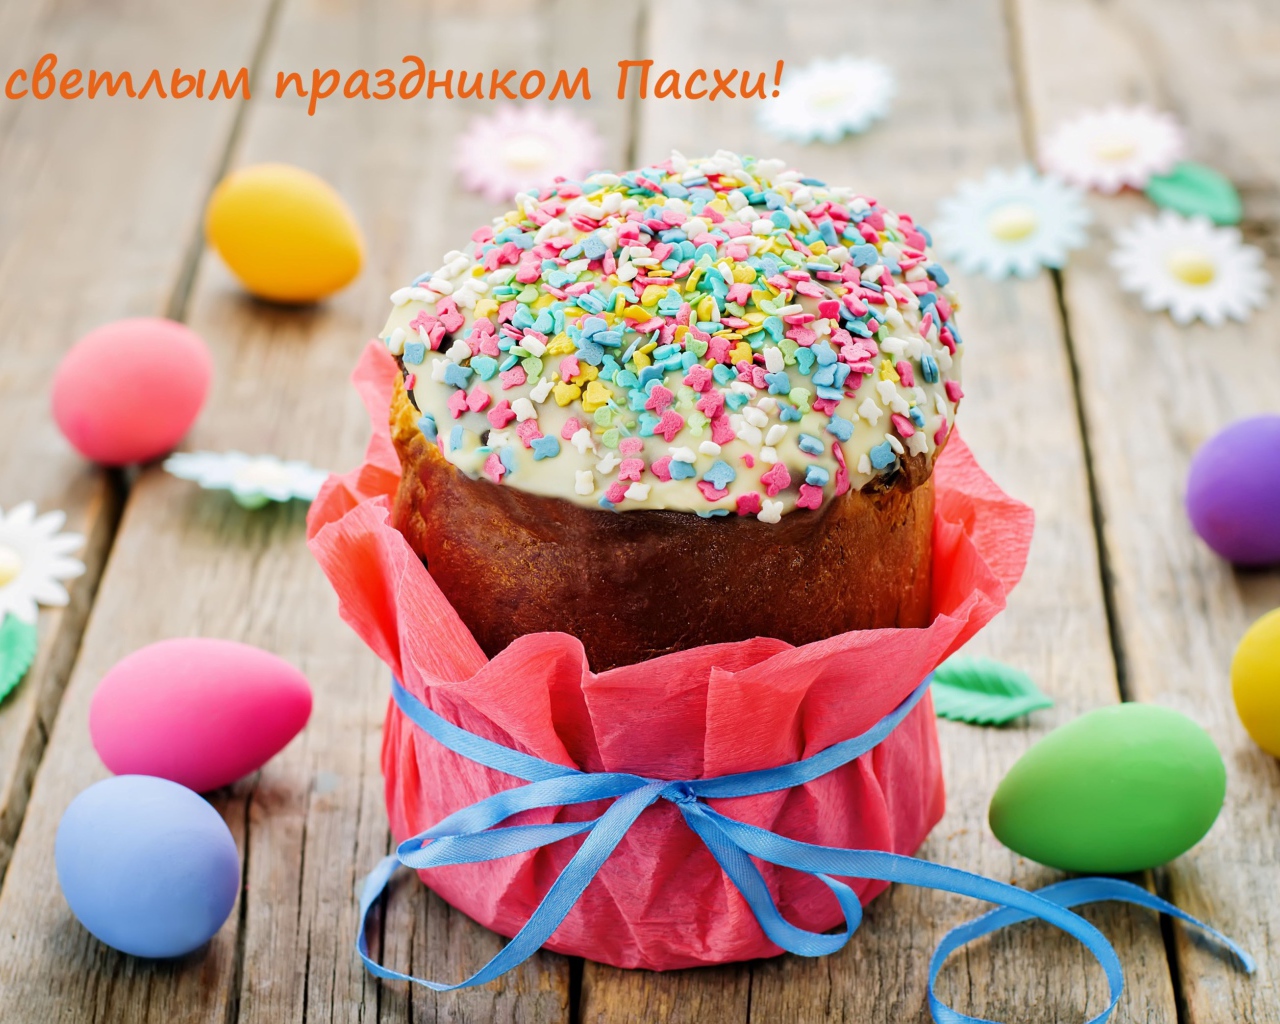 Greeting card with Easter cake and eggs for the Easter holiday